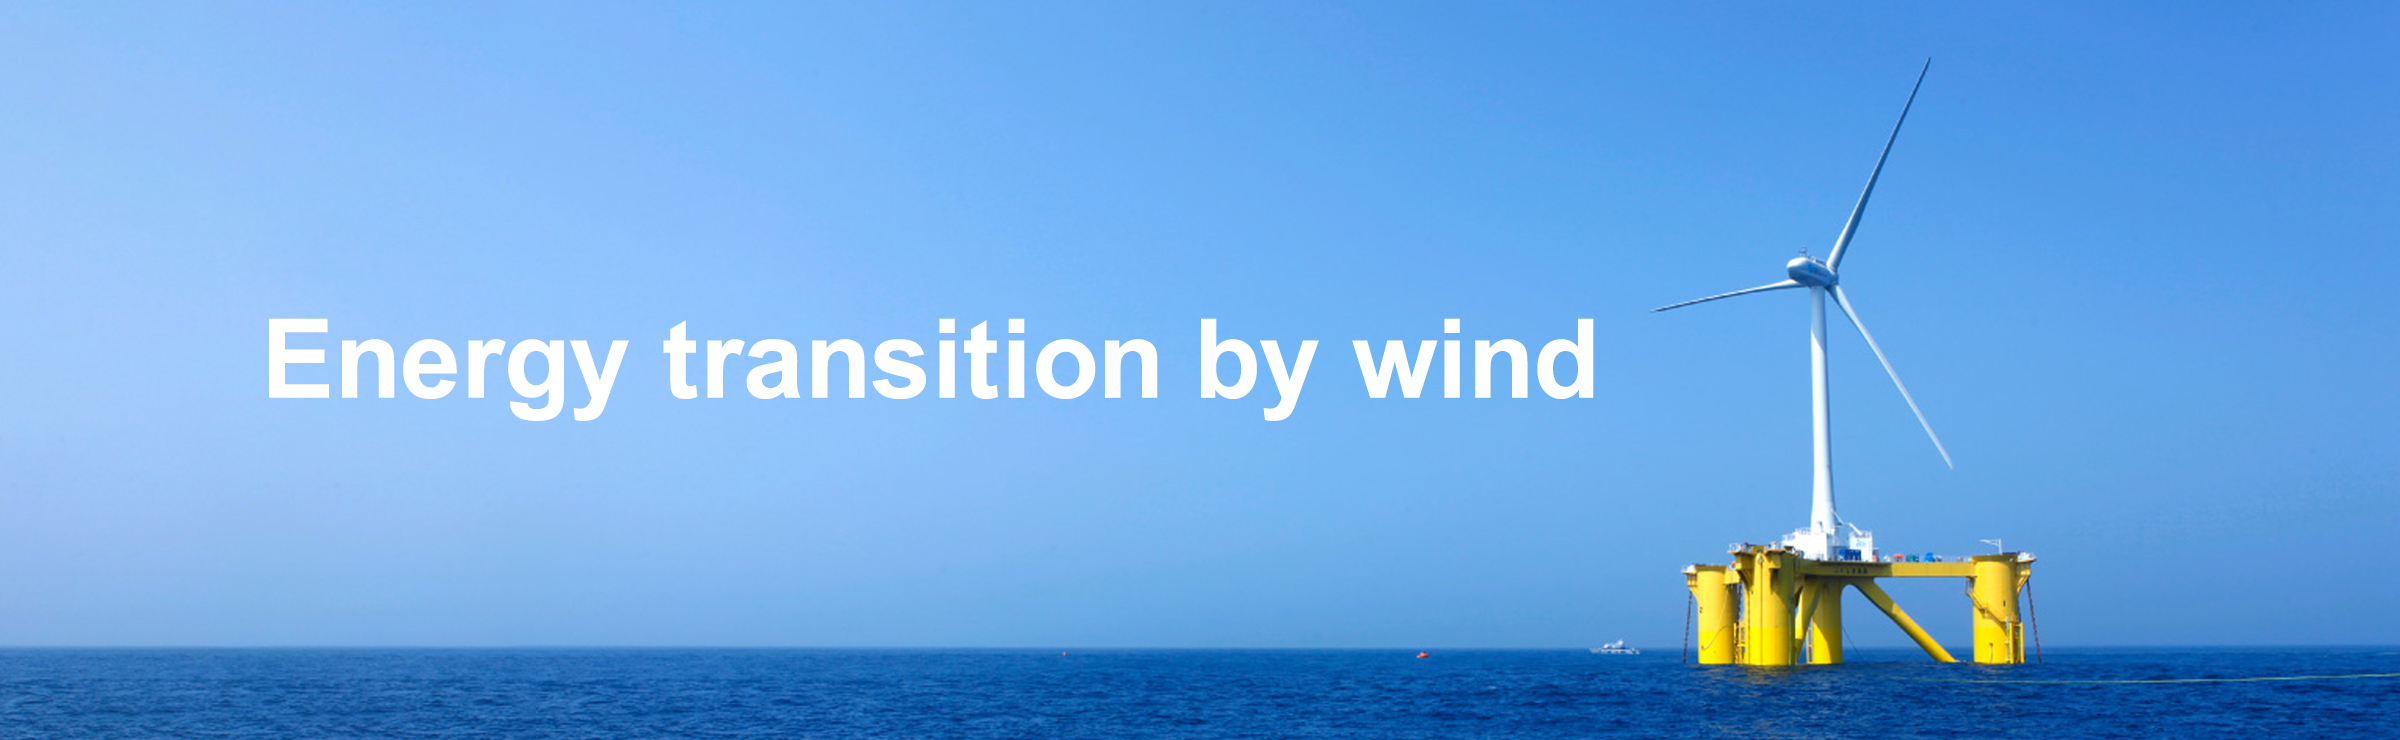 Energy transition by wind